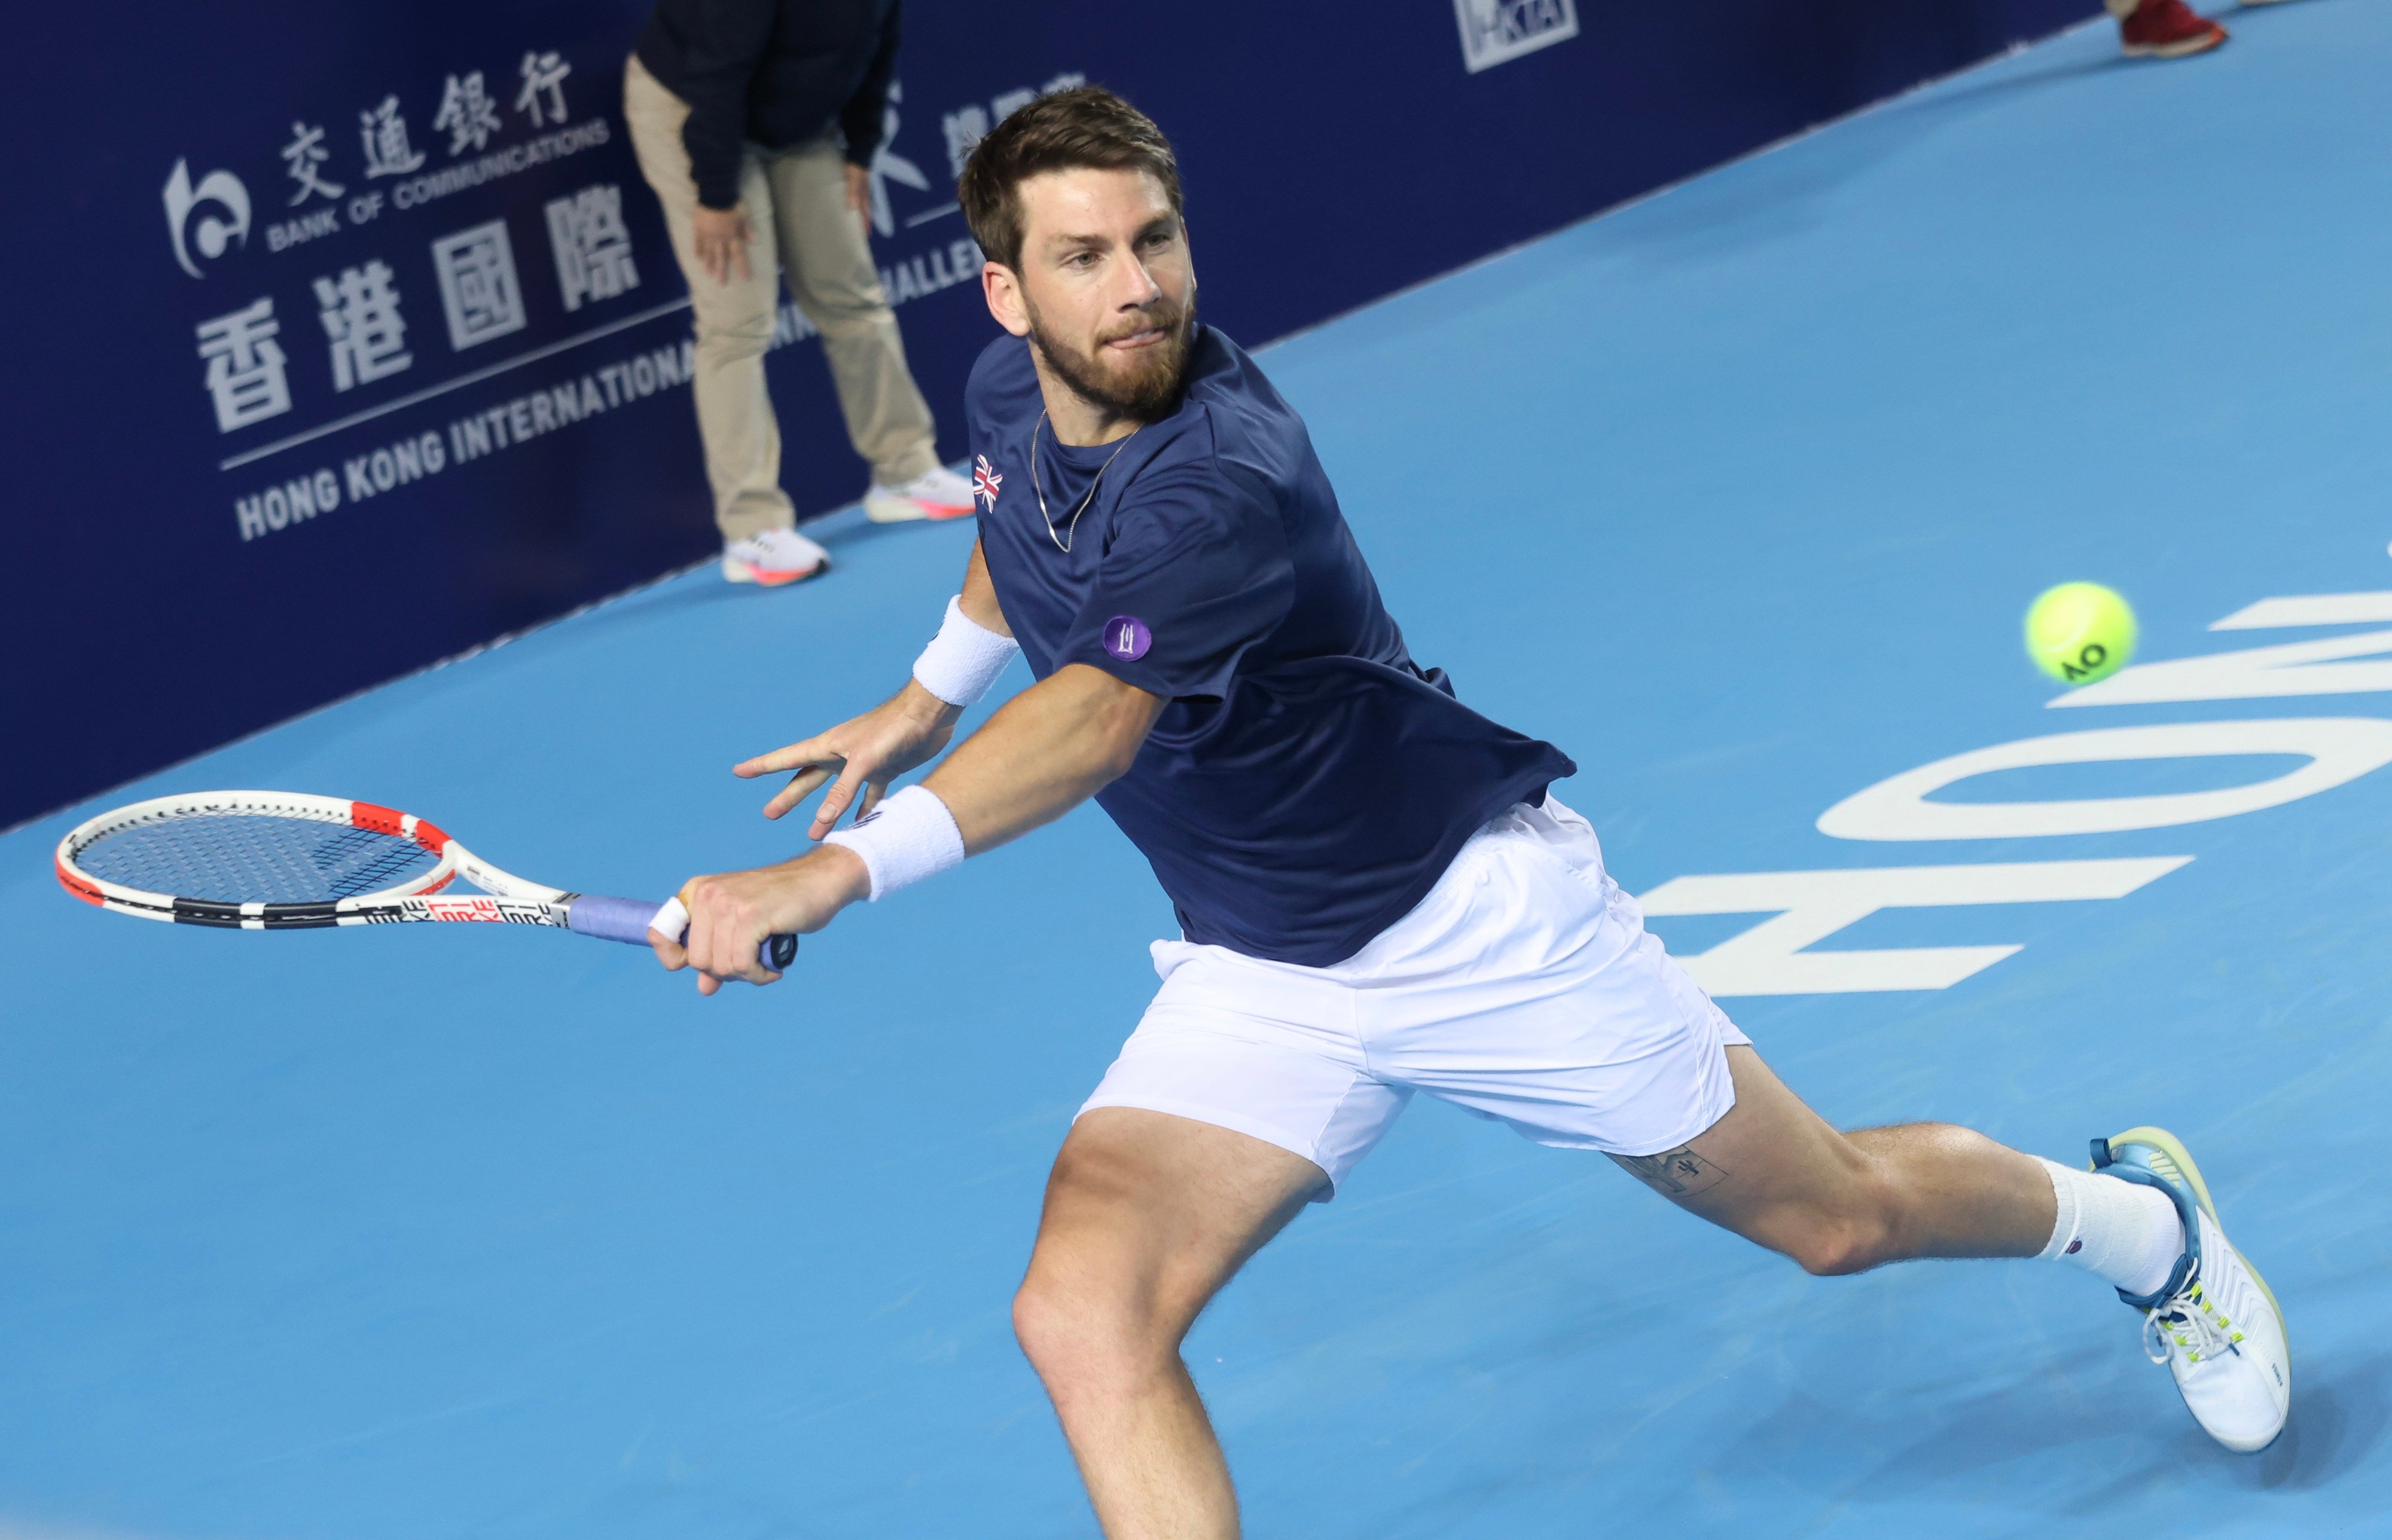 Cameron Norrie on his way to victory on the opening night of the Hong Kong International Tennis Challenge. Photo: Jonathan Wong